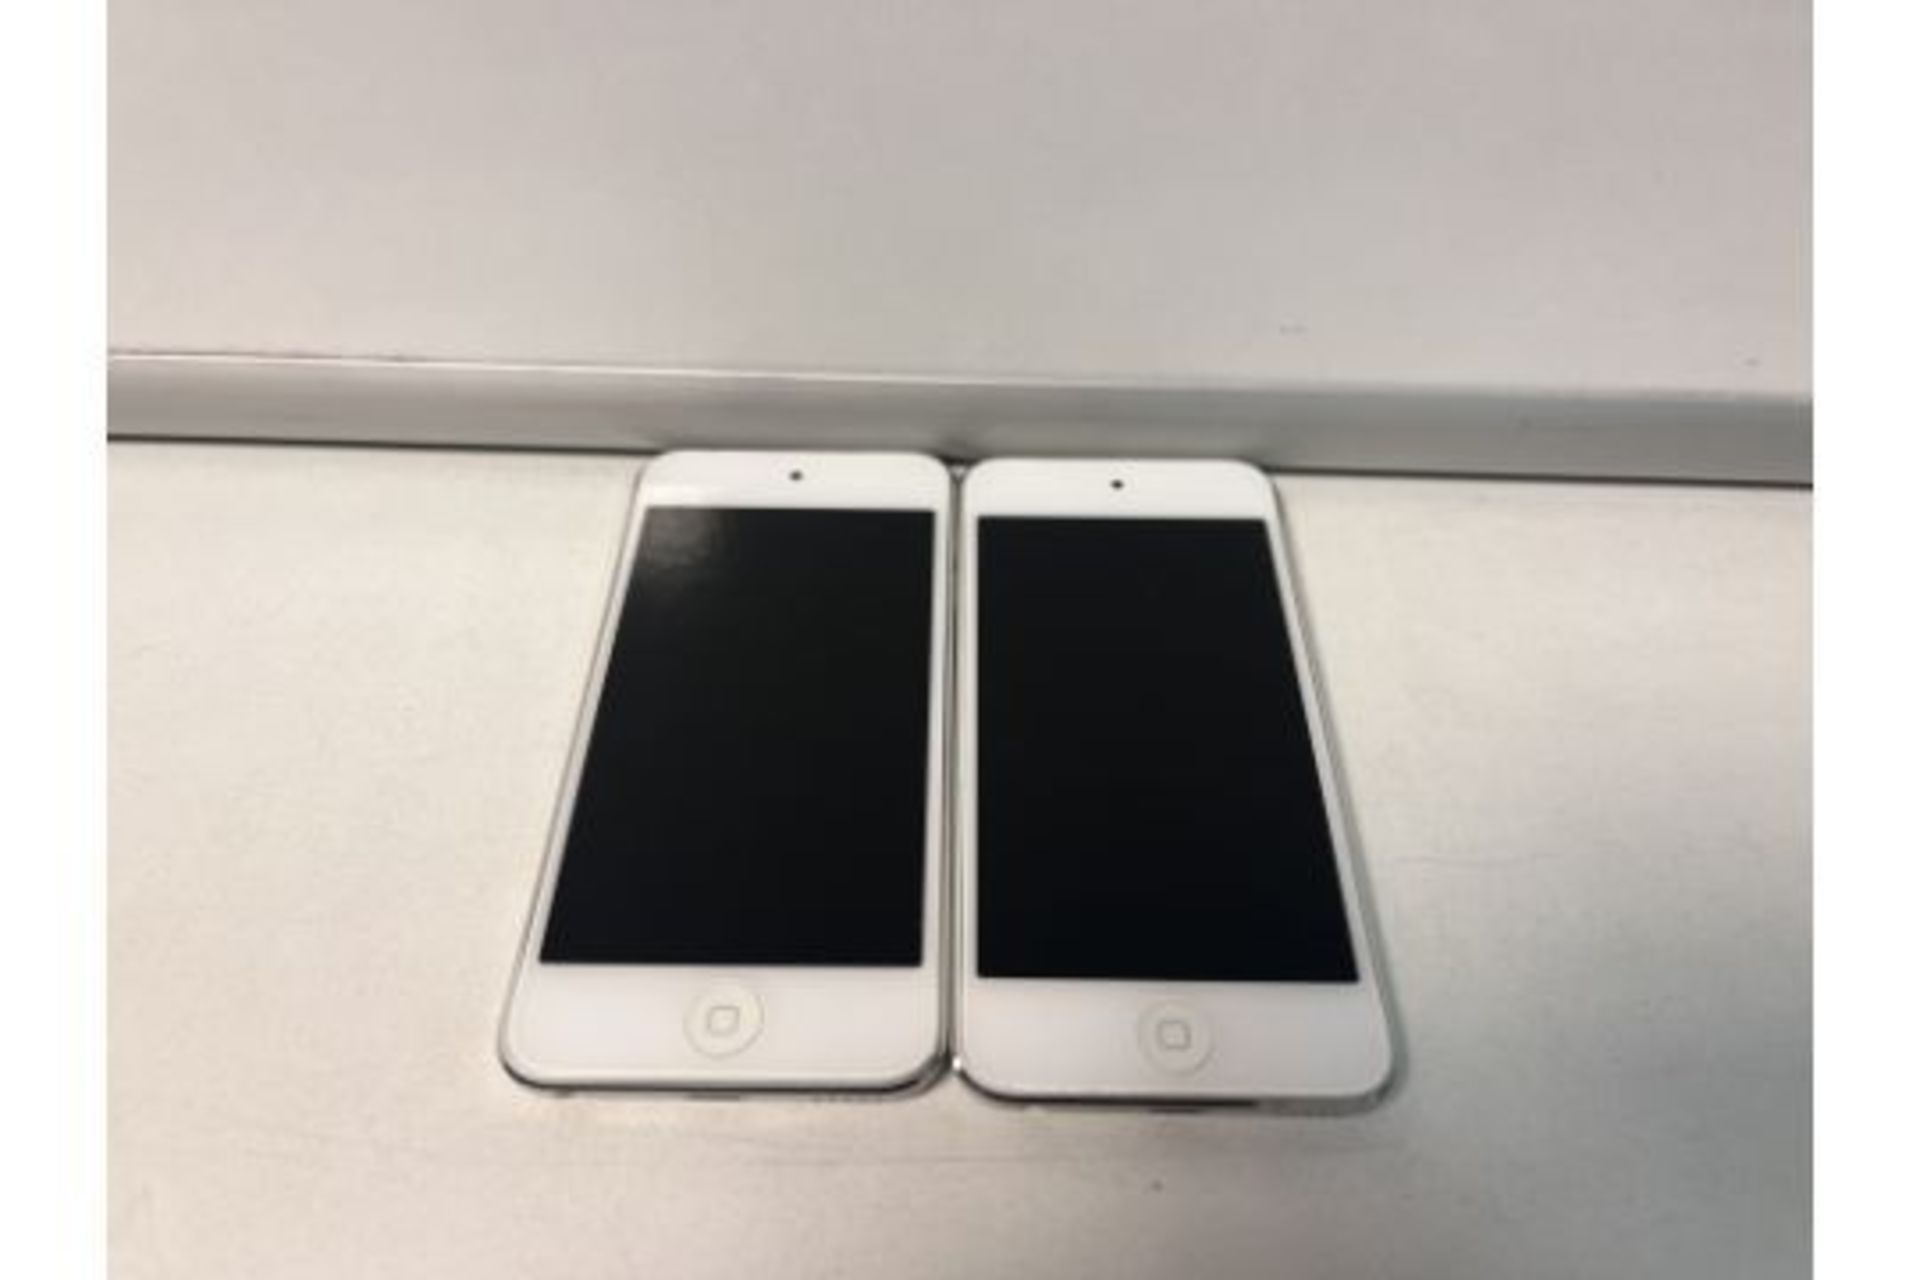 2 X APPLE IPOD TOUCH 5TH GEN, 16GB FOR SPARES AND REPAIRS (158)